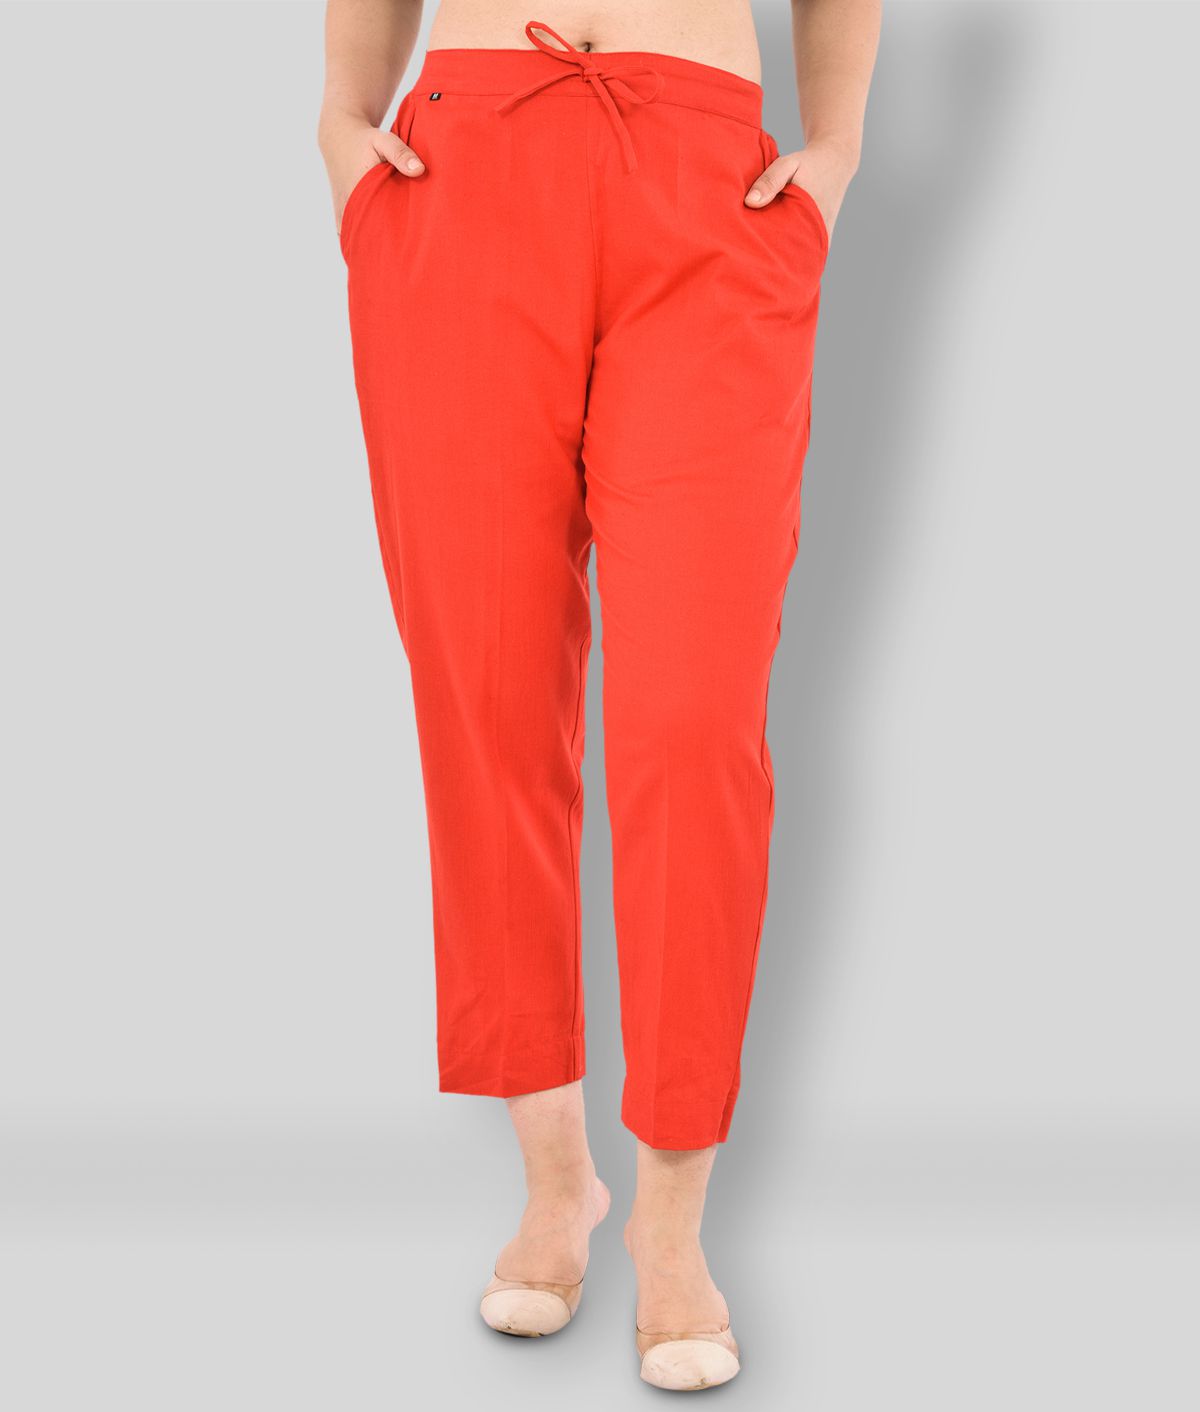     			FabMoon - Red Cotton Regular Fit Women's Casual Pants  ( Pack of 1 )